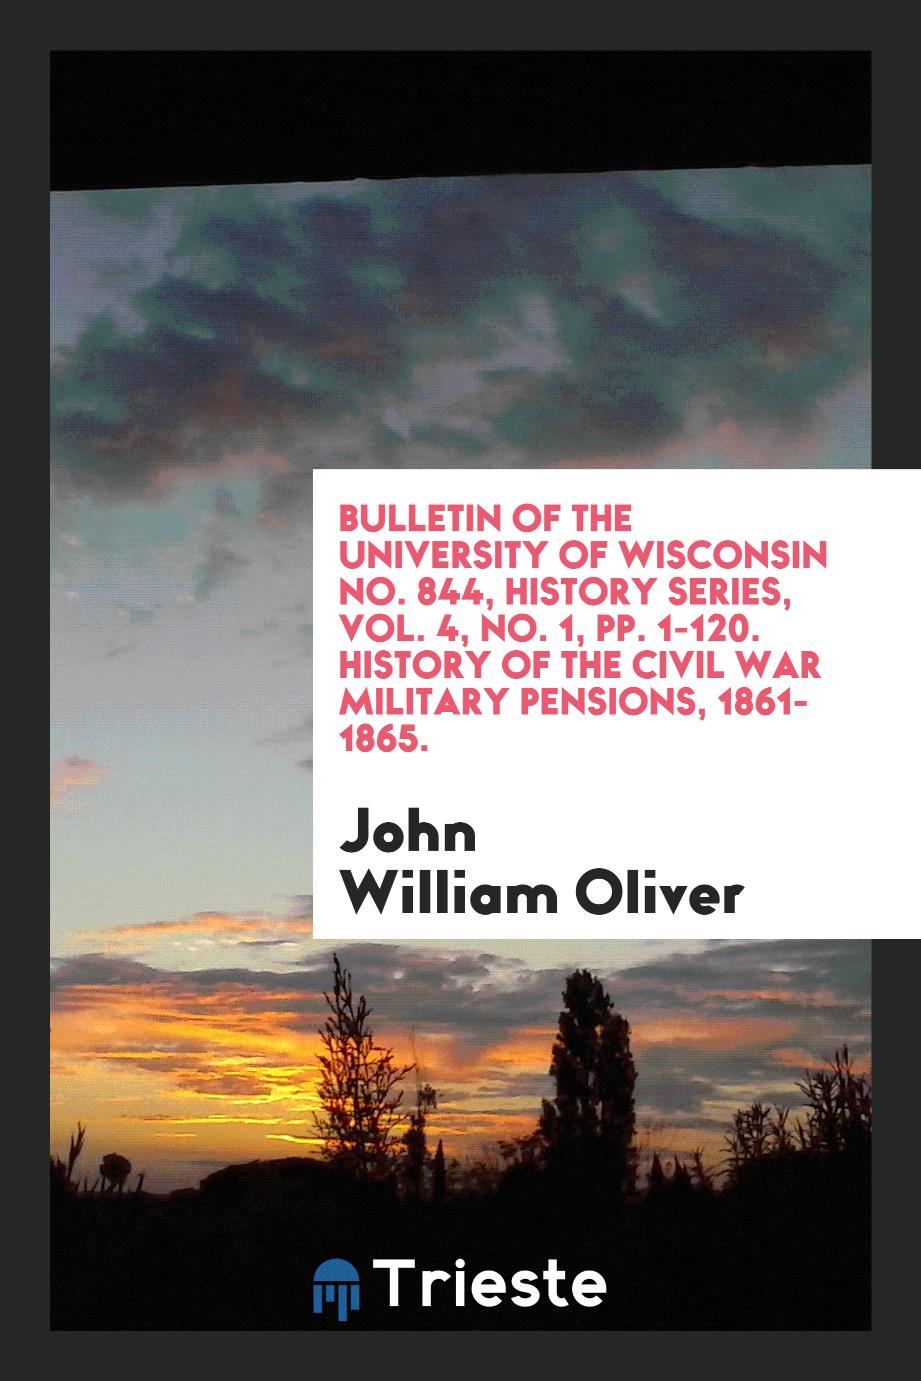 Bulletin of the University of Wisconsin No. 844, History Series, Vol. 4, No. 1, pp. 1-120. History of the Civil War Military Pensions, 1861-1865.